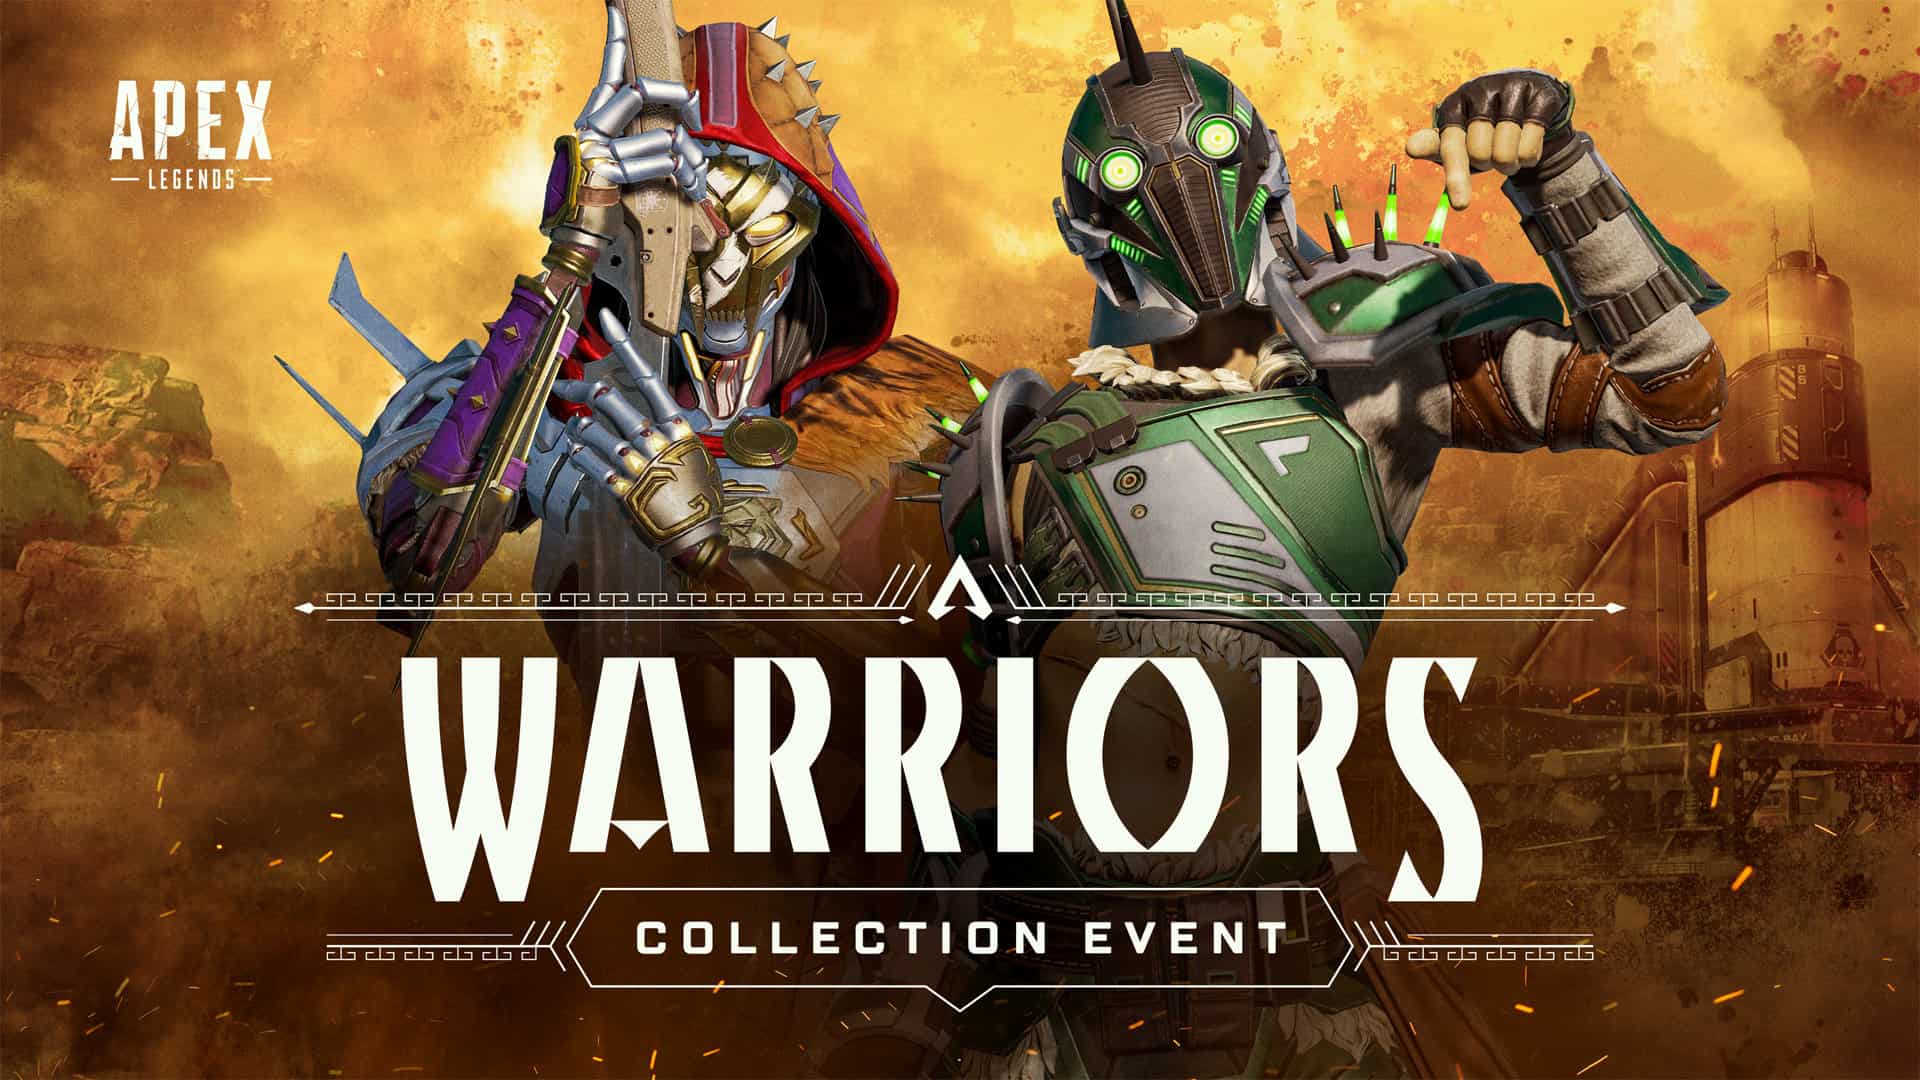 Apex Legends gets a new Arena map & more in Warriors collection event next week